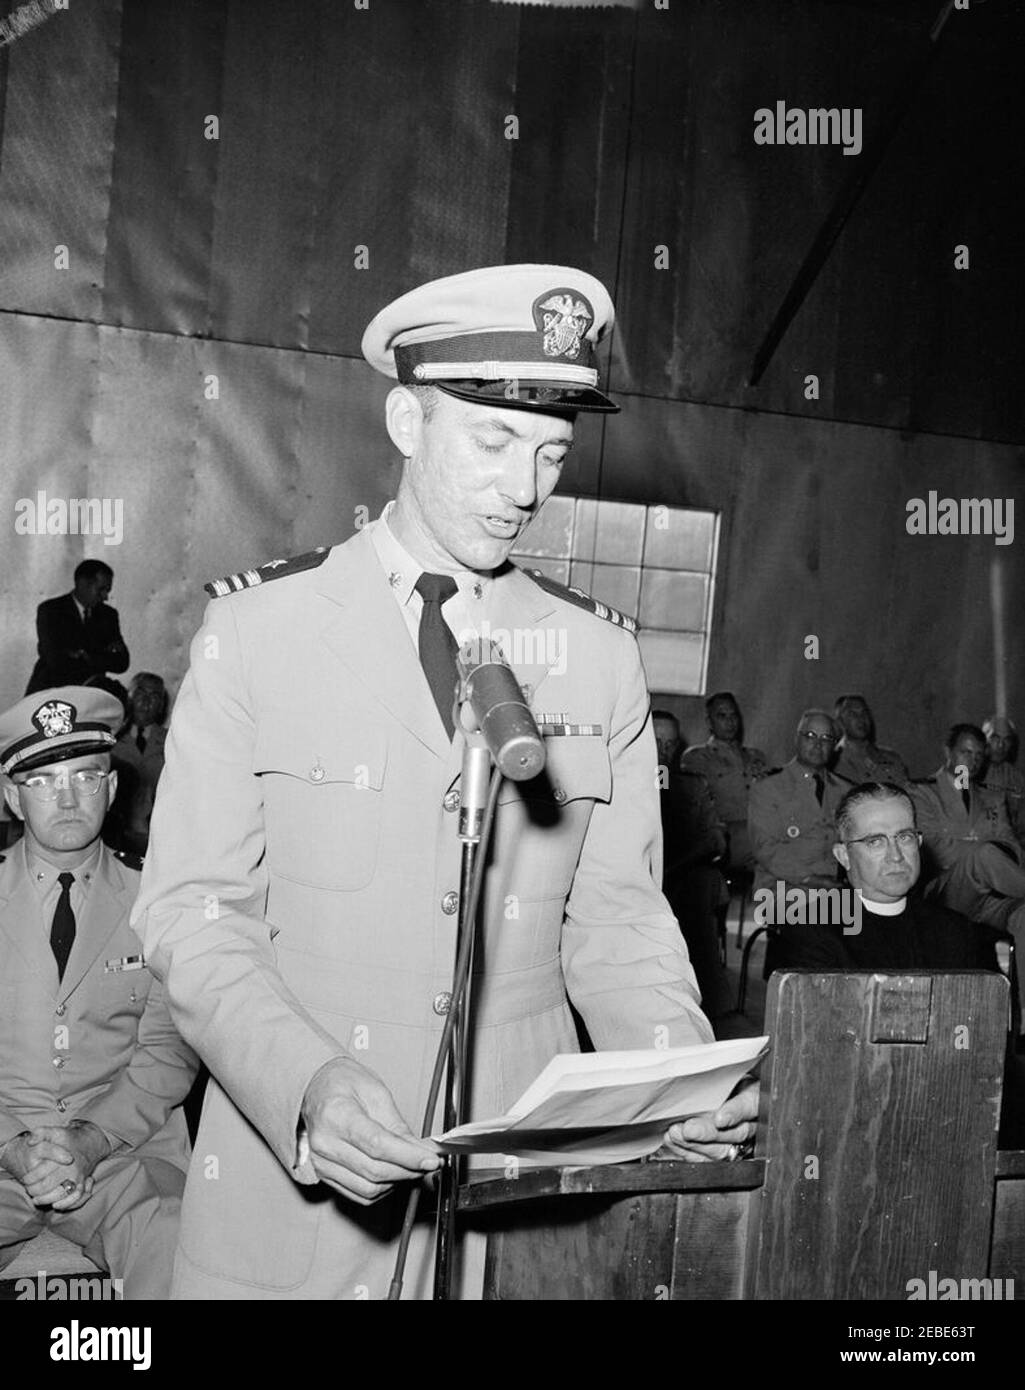 Camp David, Change of Command Ceremony (no President Kennedy). Unidentified officer of the United States Navy speaks before a group of military and civilian observers during a ceremony marking a change of command of the Presidentu2019s retreat at Camp David. Naval Aide to the President Captain Tazewell T. Shepard sits at right in background. Camp David, Frederick County, Maryland. [Photograph by O.W. Harris] Stock Photo